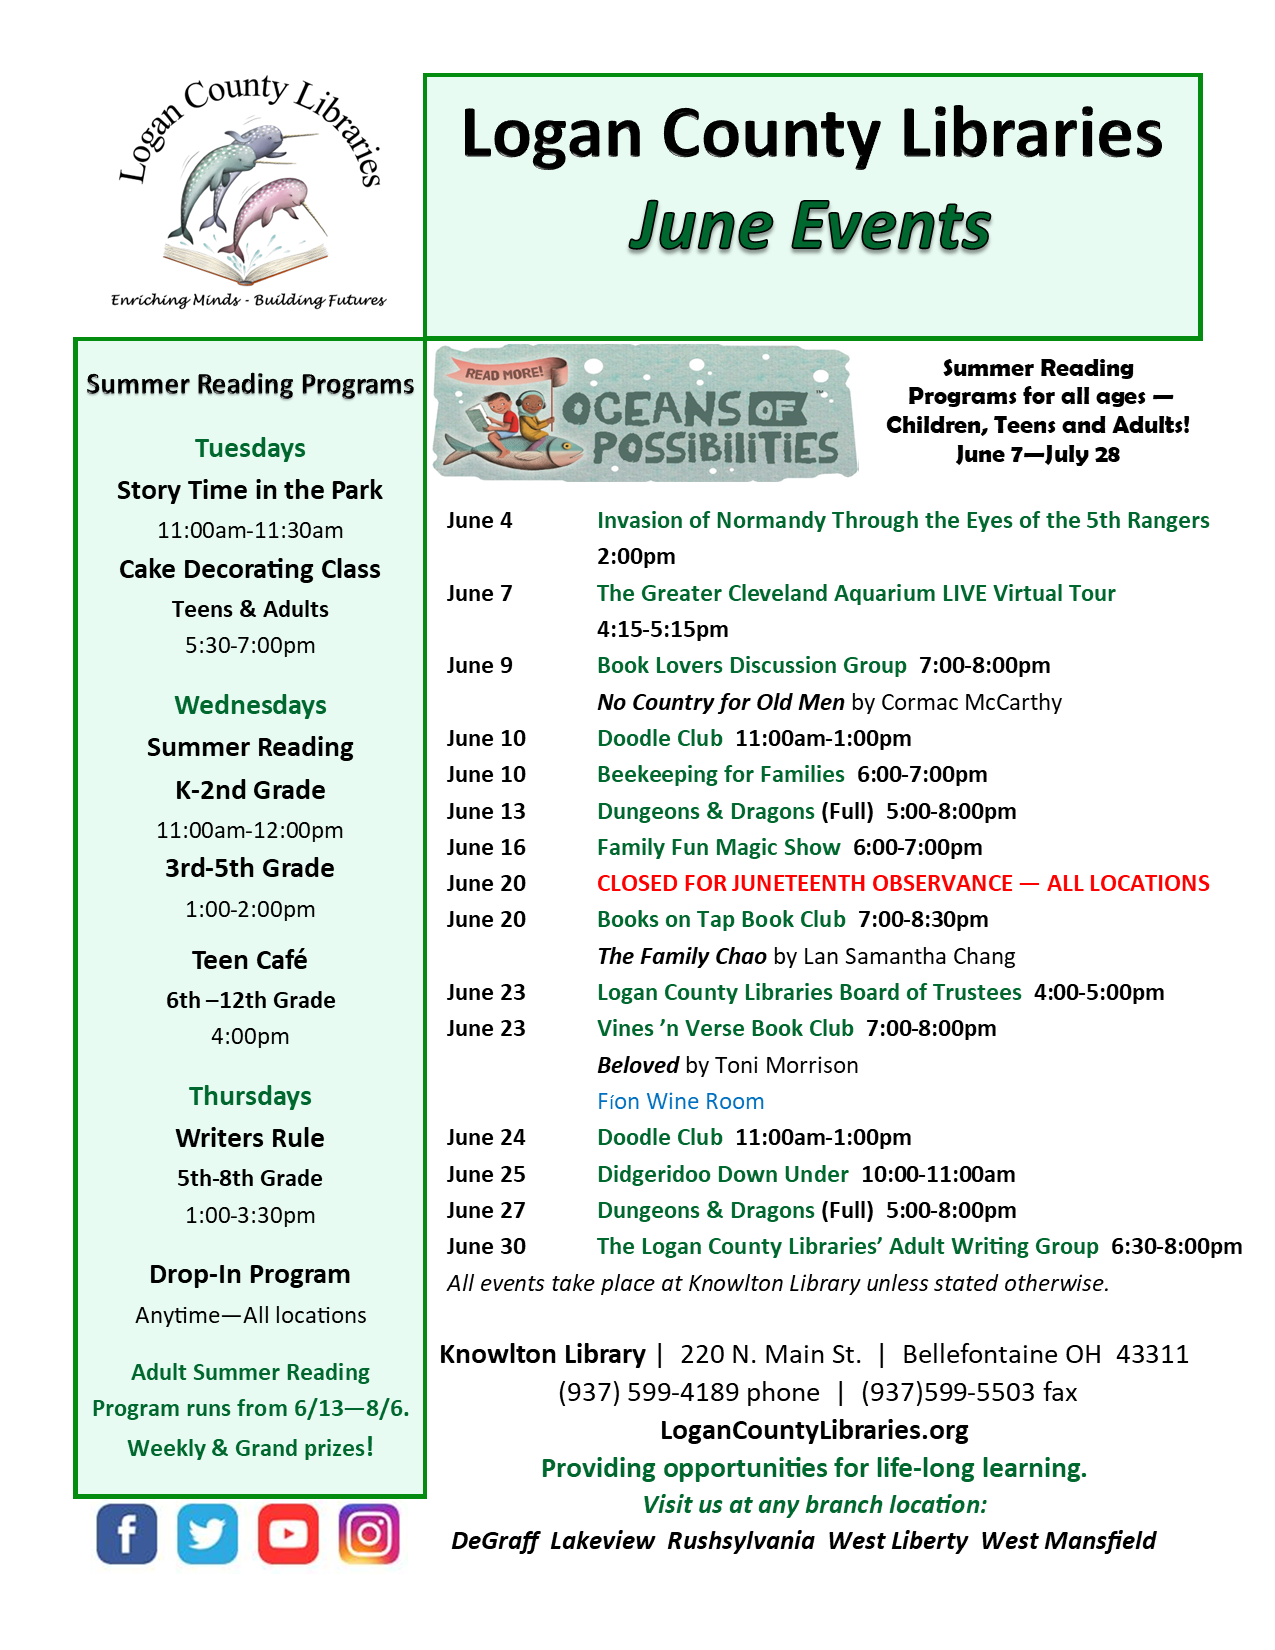 June Calendar of Library Events